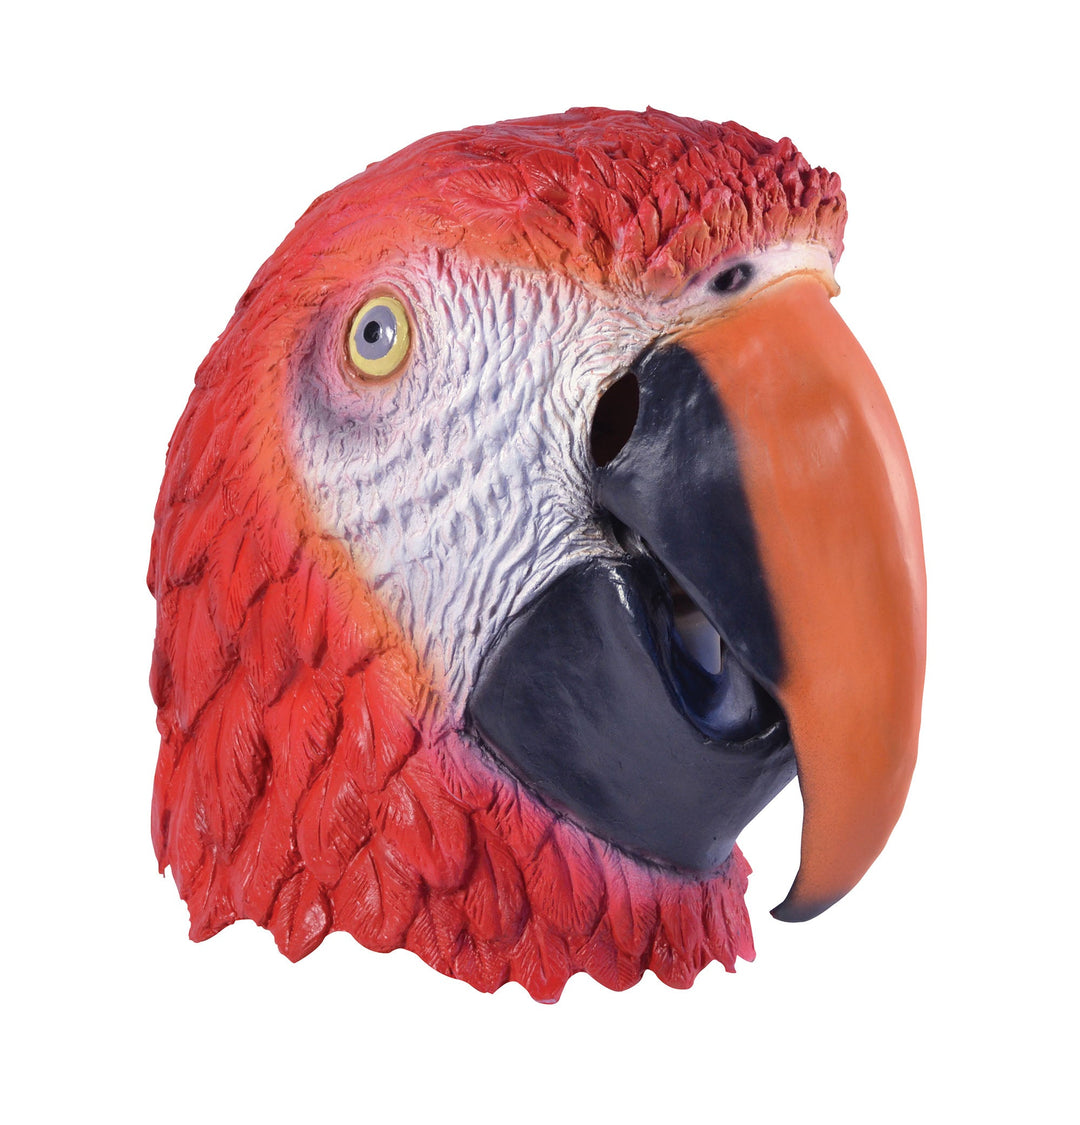 Parrot Mask Red Bird Rubber Overhead Pirate_1